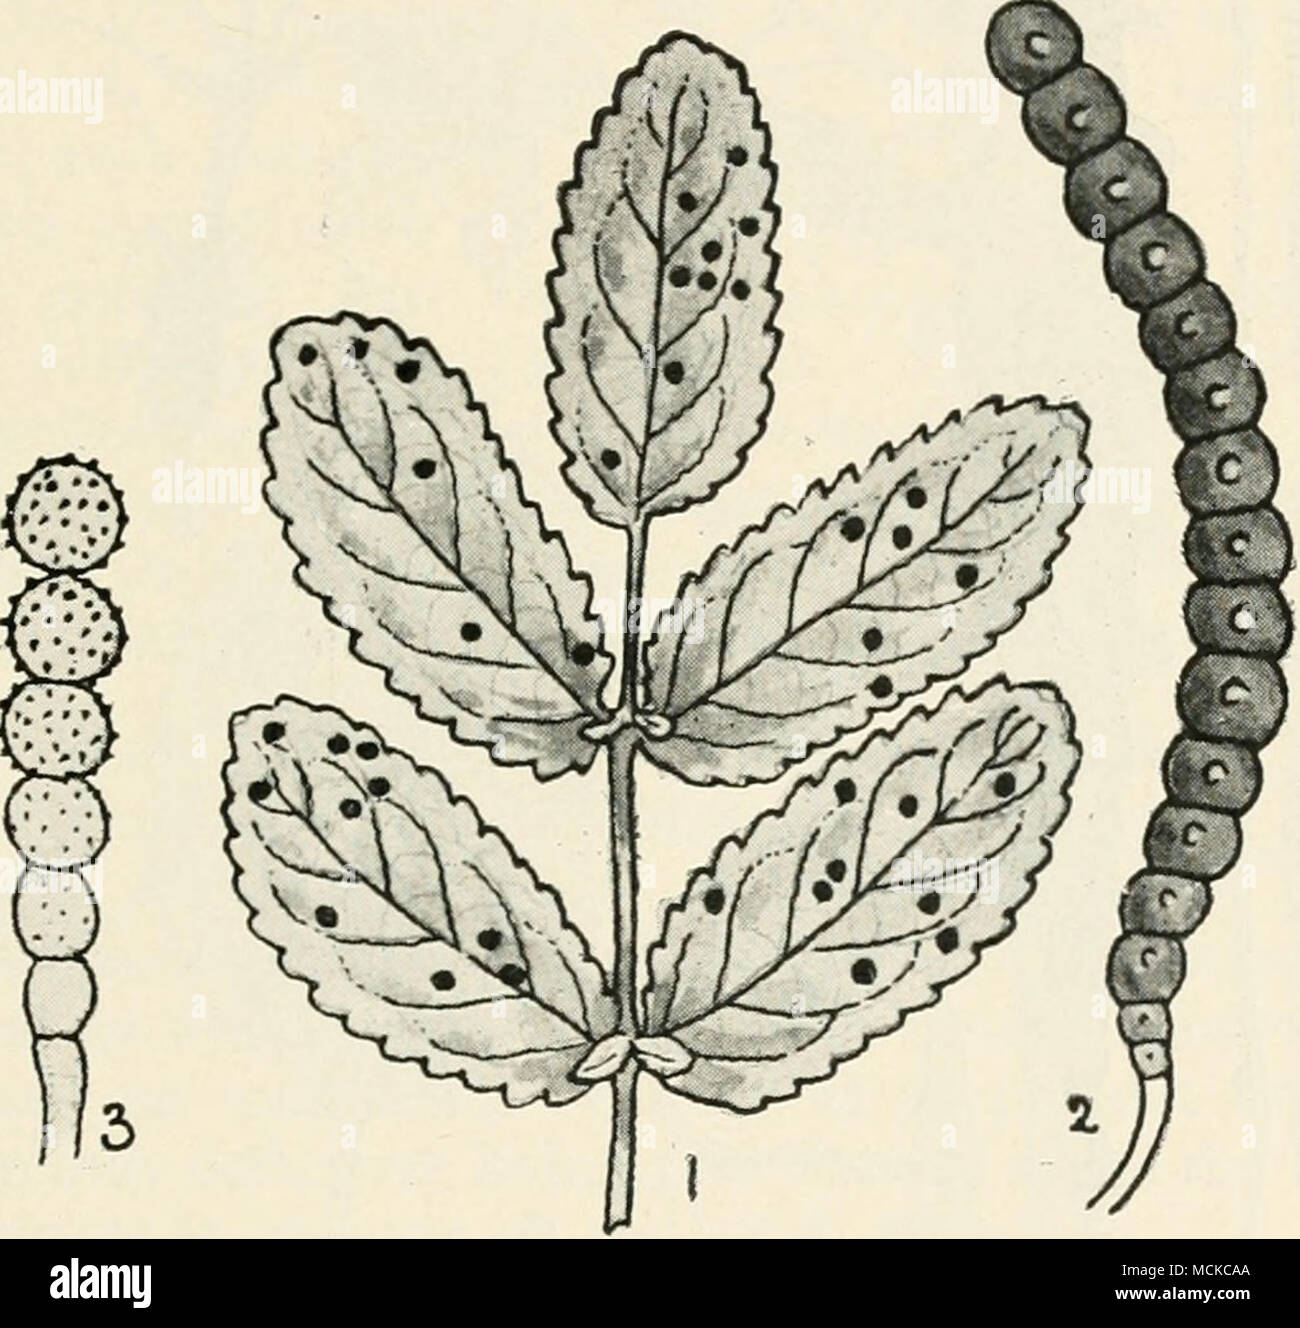 . Fig. 94.—Xenodochtiscarbonarius. i, teleutospore pustules on Burnet saxifrage, nat. size; 2, a single teleutospore, highly mag, ; 3, a chain of uredospores, highly mag. Teleutospores cylindrical or worm-like, often curved, composed of 10-20 globose cells, much constricted at the septa, smooth or minutely warted towards the apex, dark brown; individual cells 15-20 /x diam.; stalk short, hyaline. GYMNOSPORANGIUM (Hedw.) Teleutospores forming large subgelatinous masses, oozing out from the bark of the matrix (always Junipers in this Stock Photo